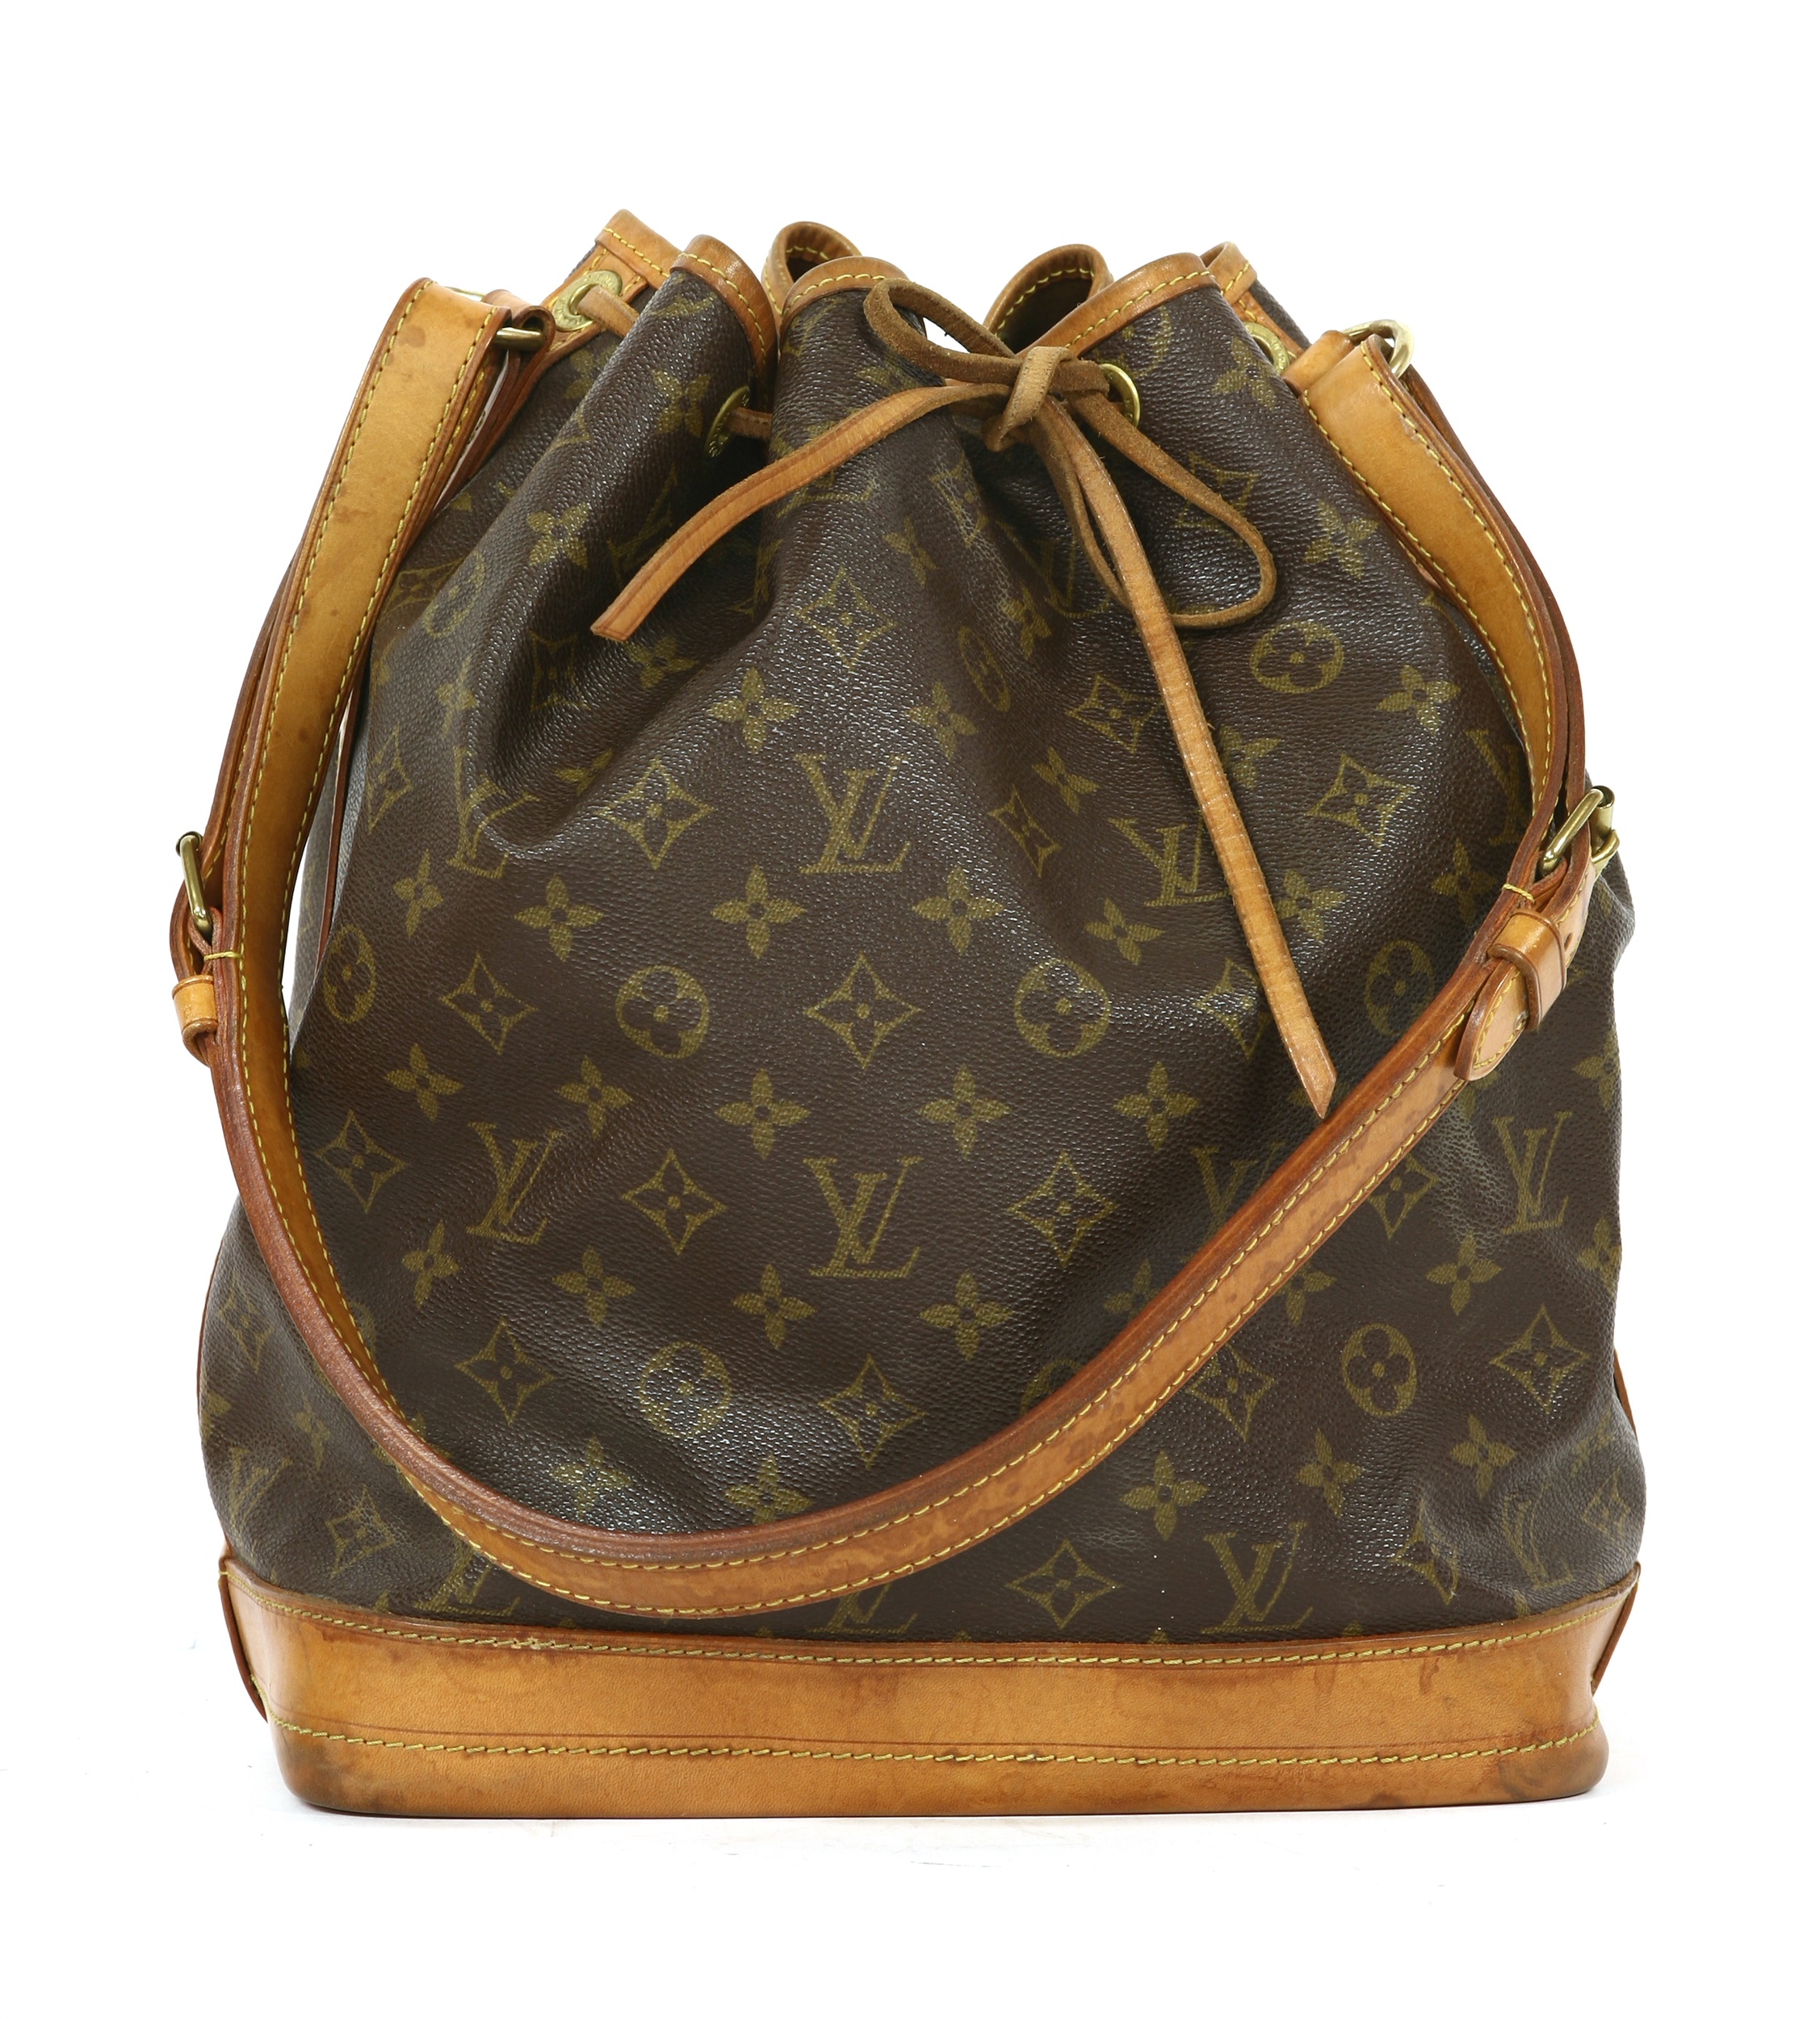 Sold at Auction: Louis Vuitton, Louis Vuitton GM Bucket Bag with